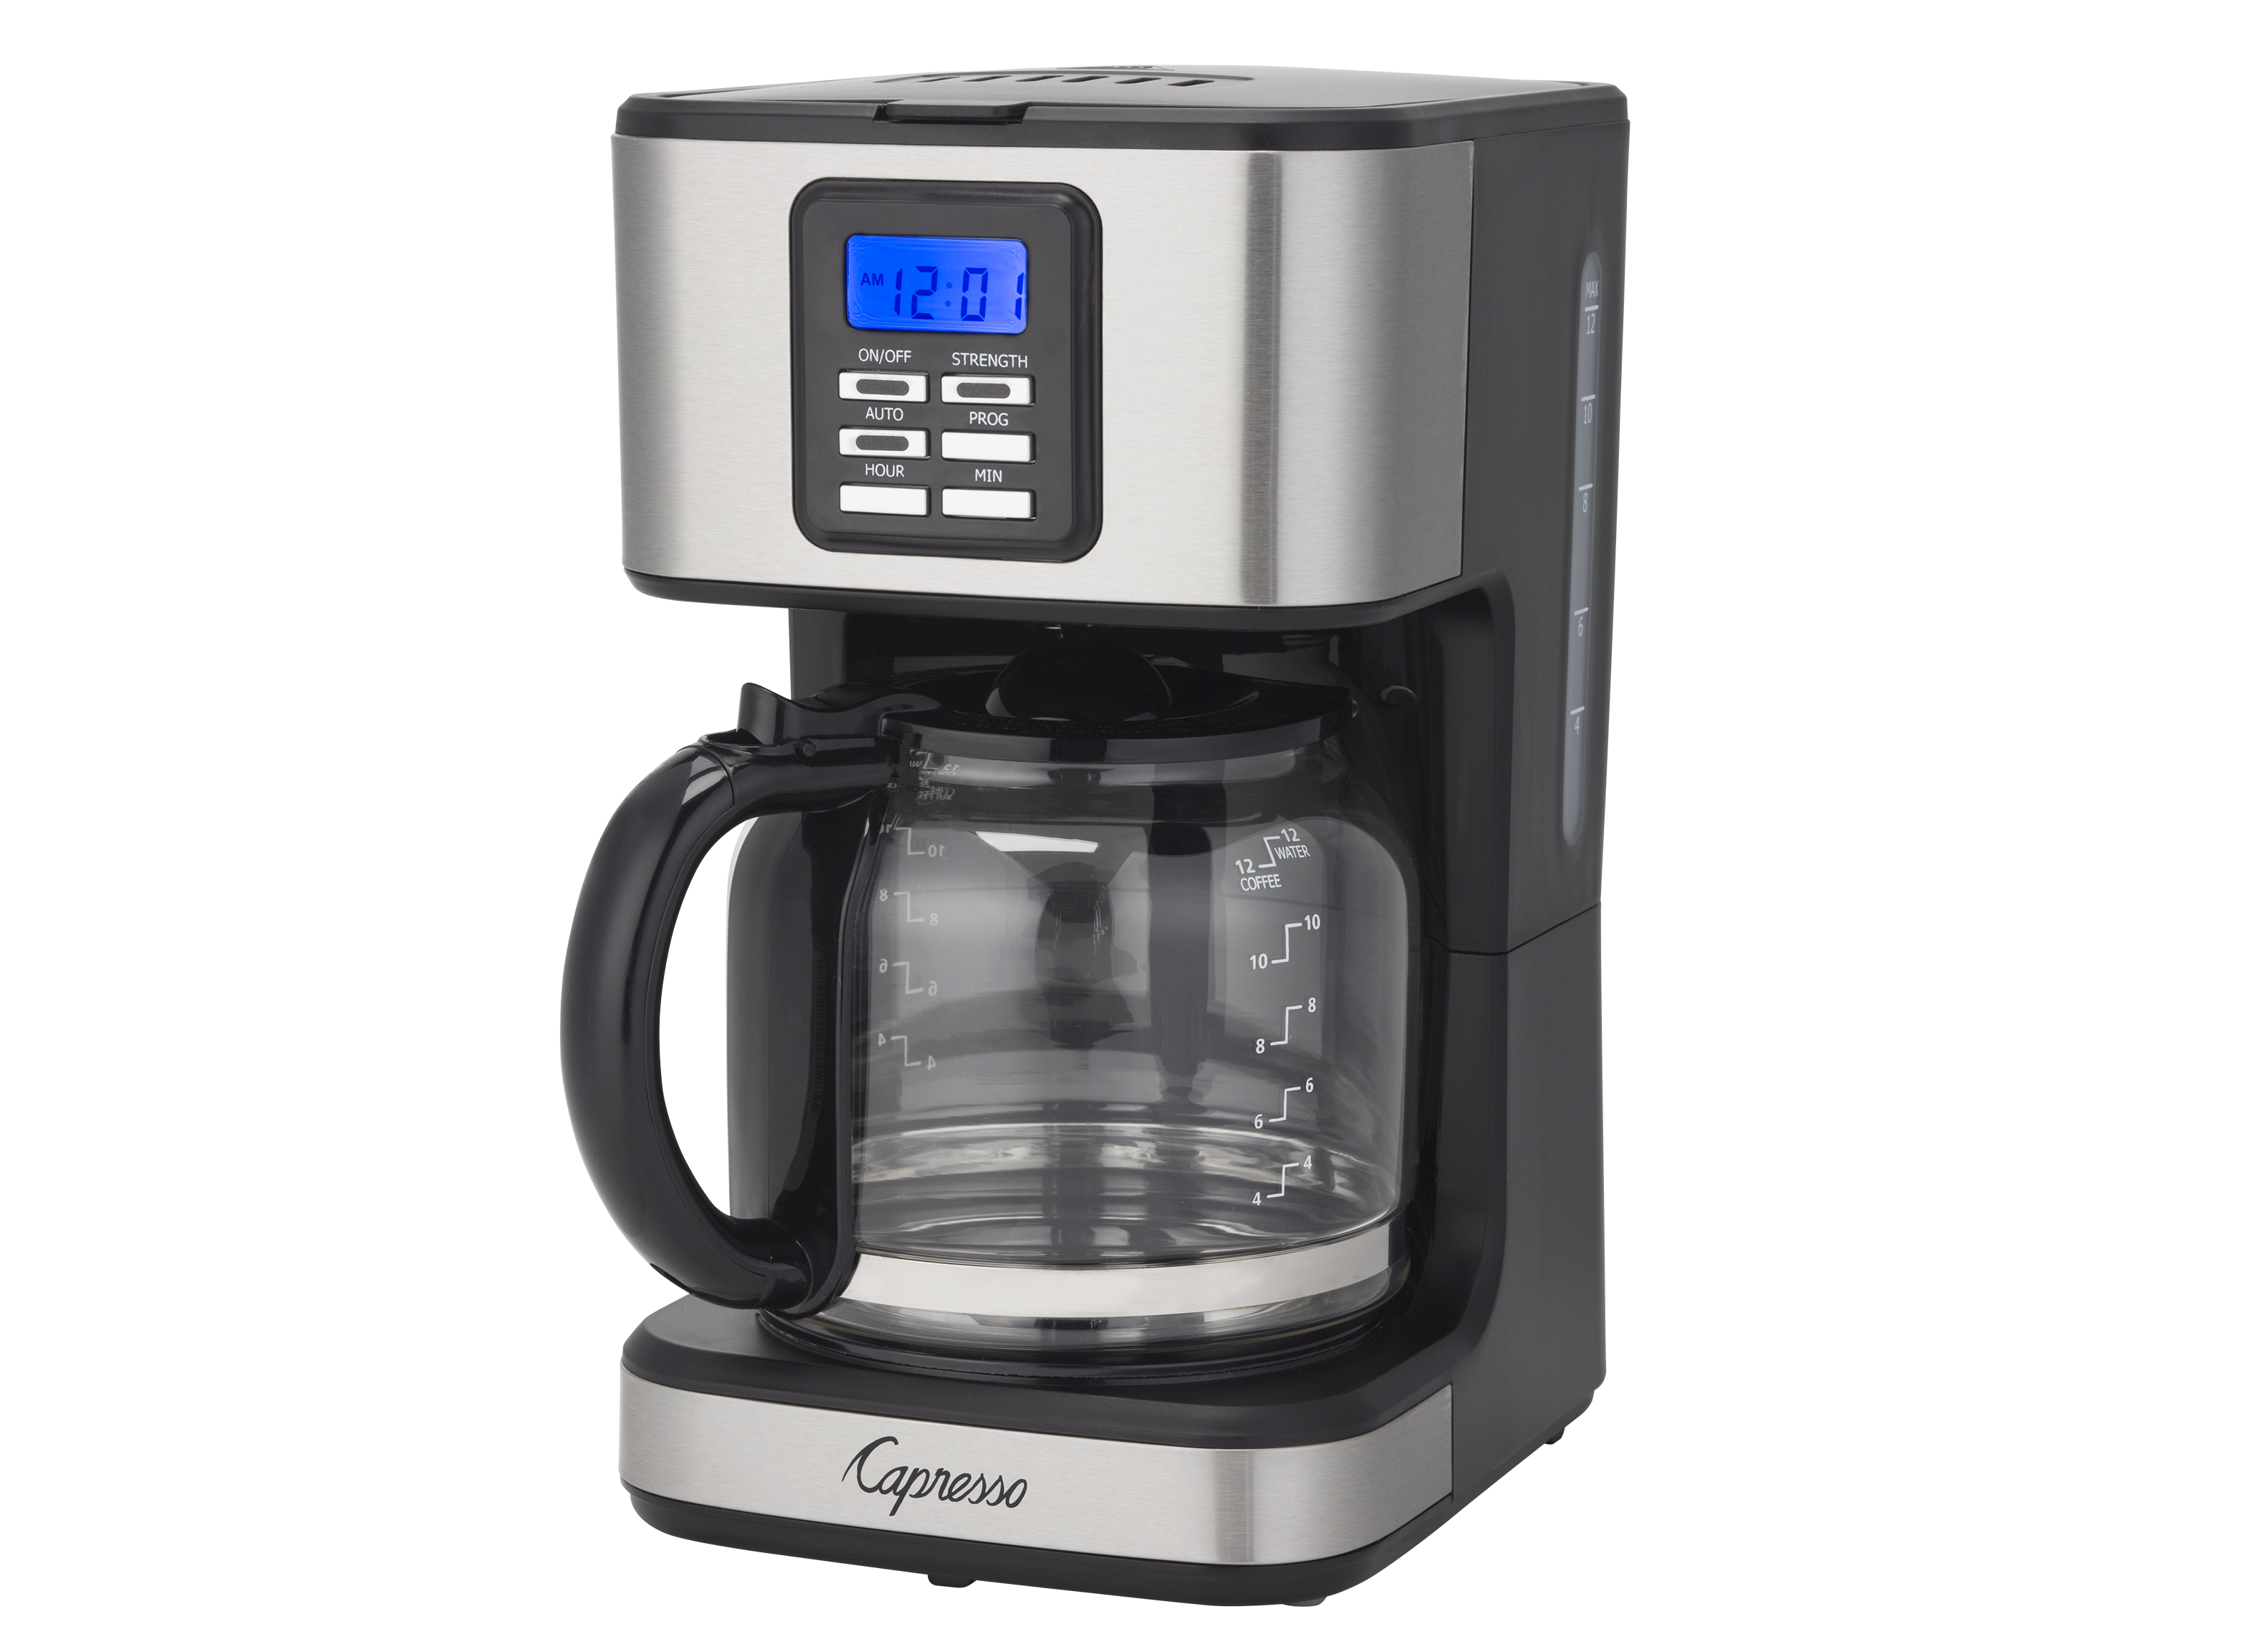 https://crdms.images.consumerreports.org/prod/products/cr/models/388219-coffeemakers-capresso-sg22012cup.png